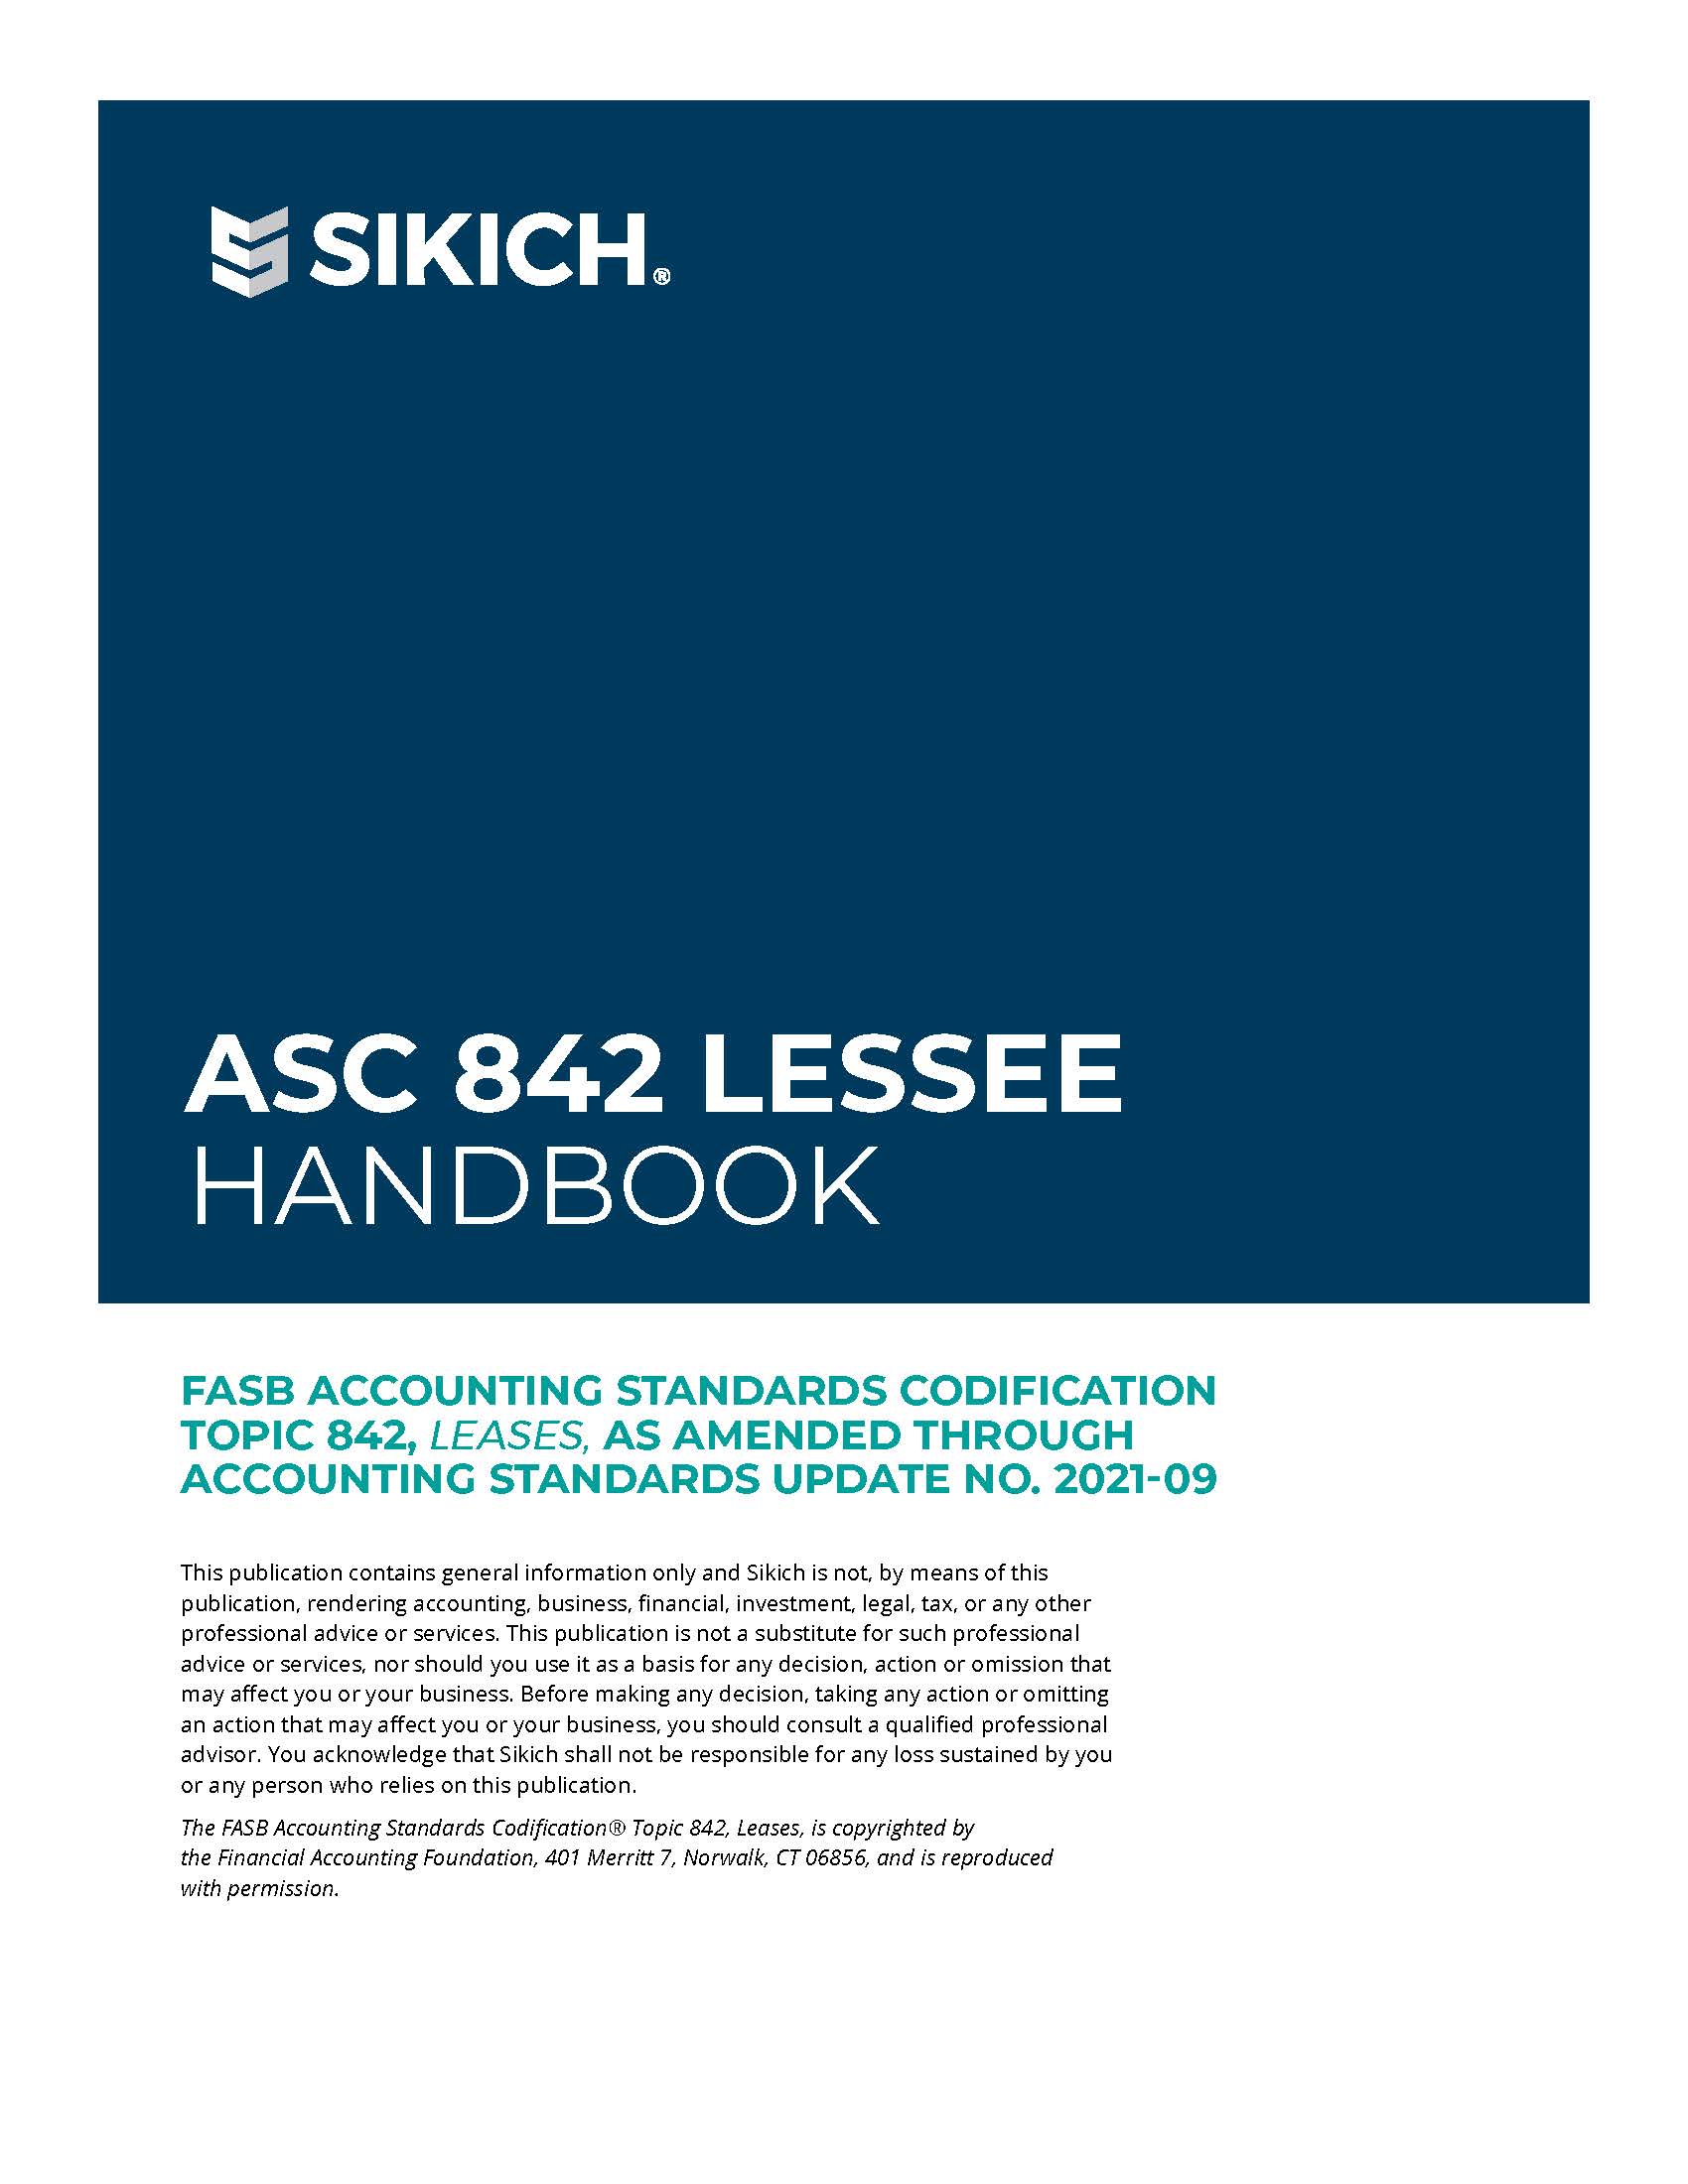 Sikich ASC 842 Lessee Handbook Cover Image